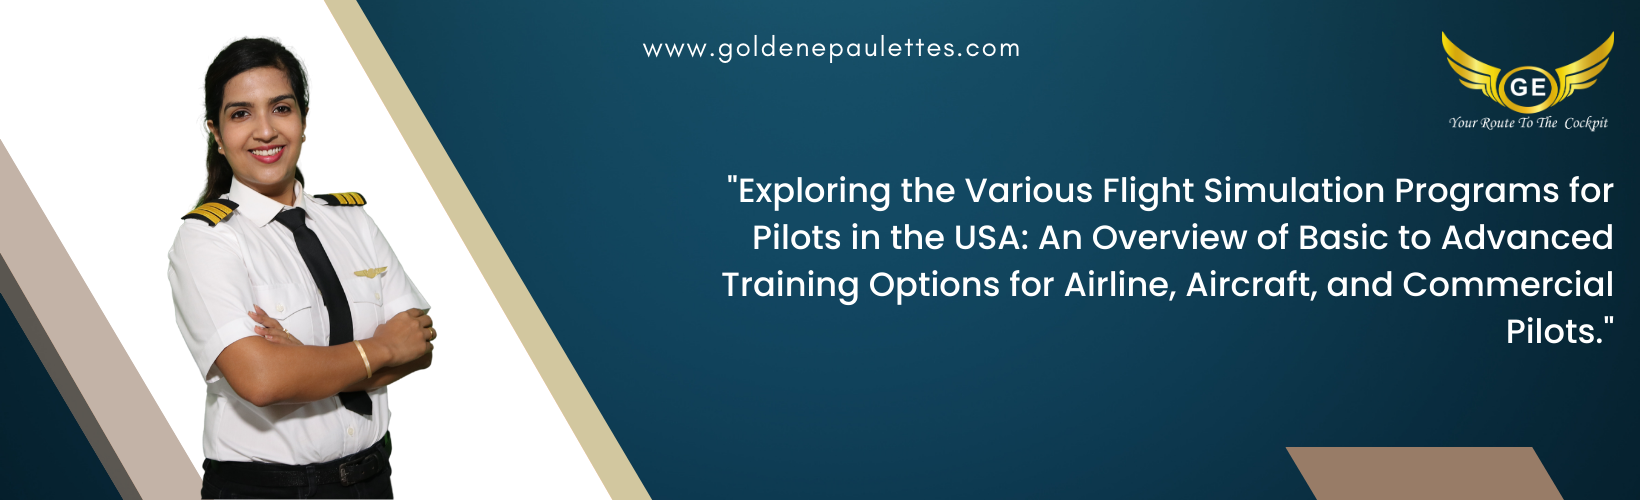 The Different Flight Simulation Programs for Pilots in the USA